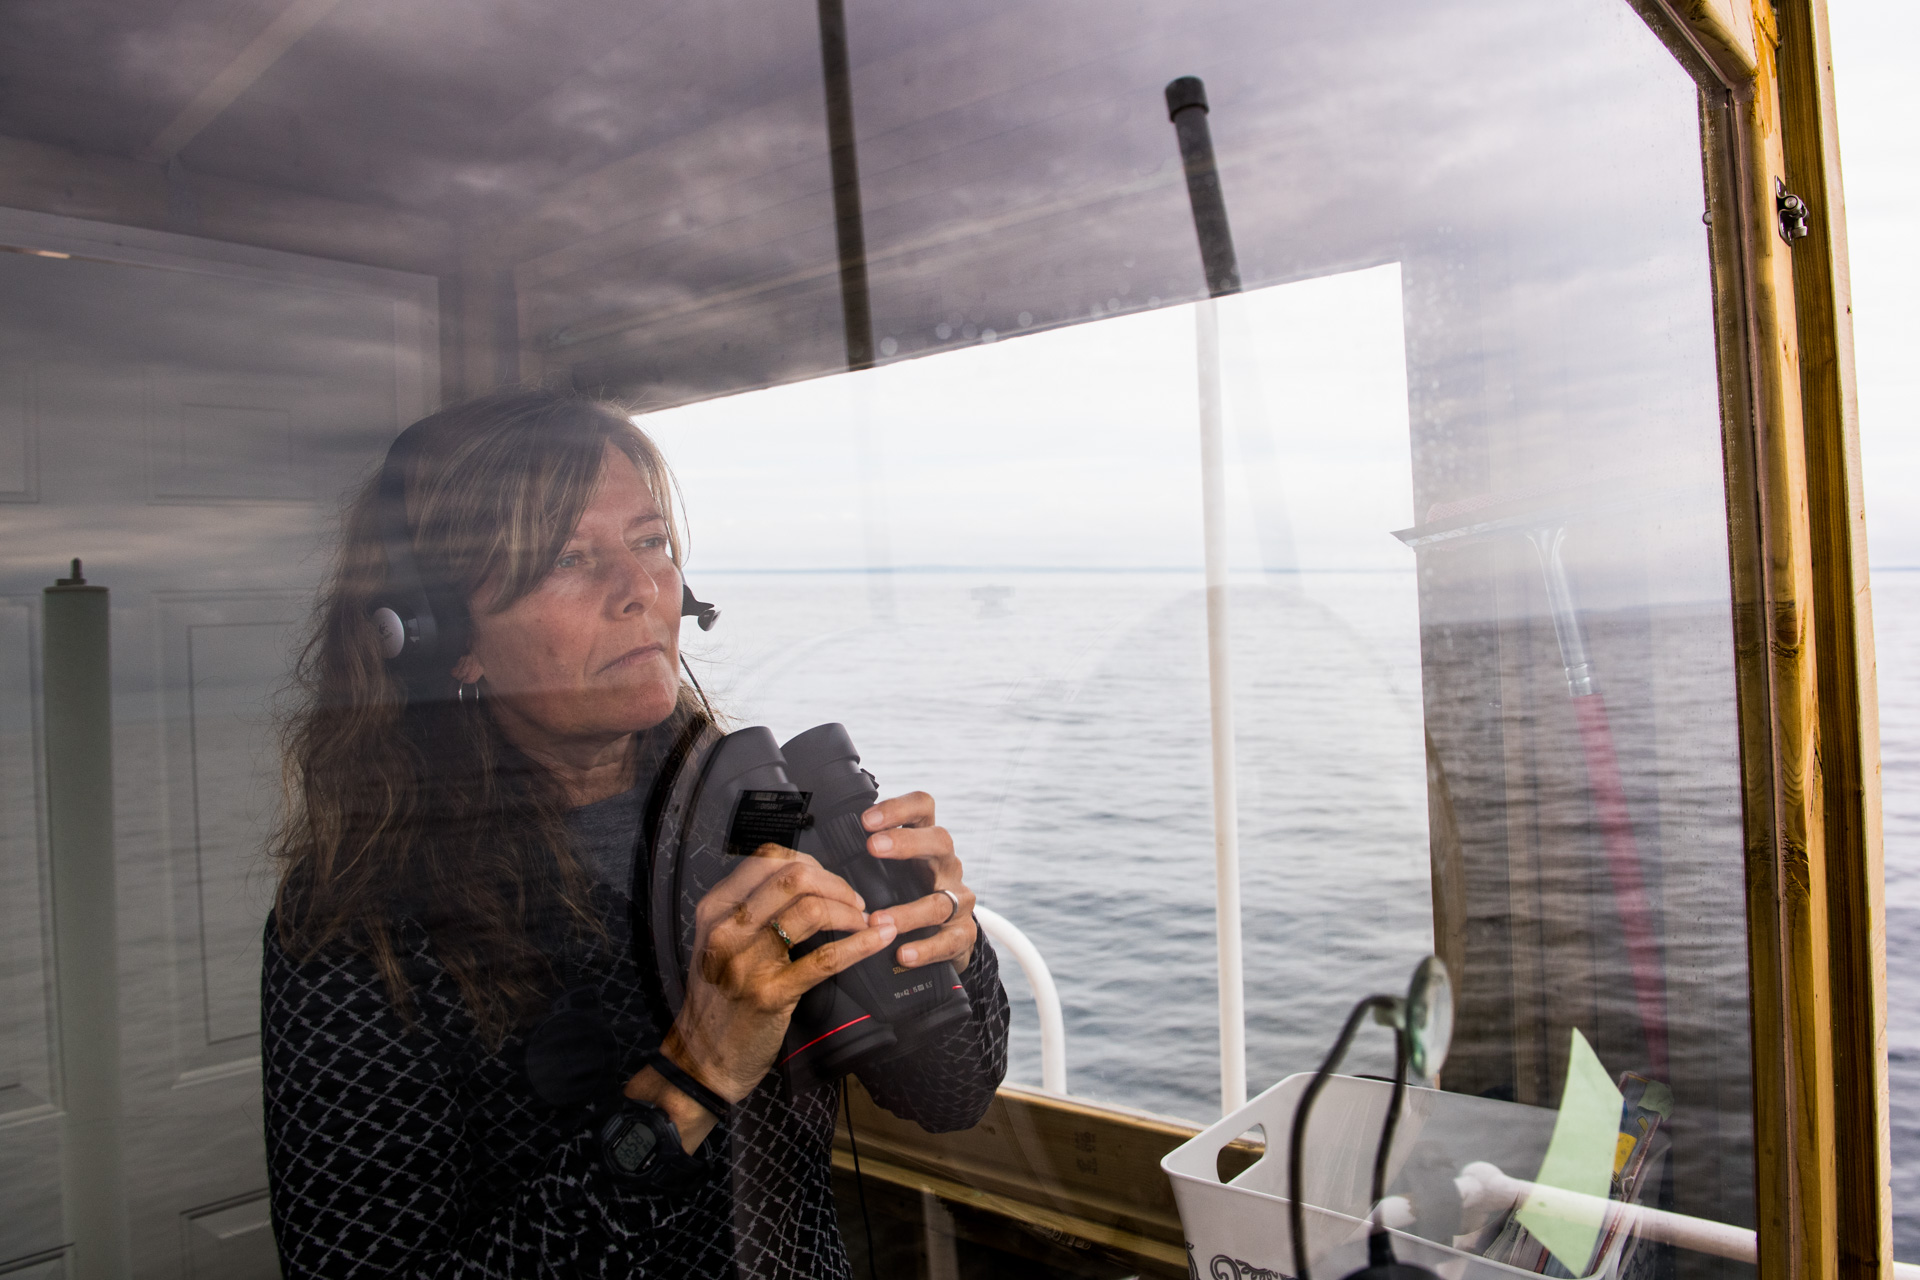 Biologist Holly Hoggan from Canadian Wildlife Services (Environment Canada) conducts bird surveys inside a look out box onboard Leeway Odyssey during the Gulf of St. Lawrence Expedition. The Expedition is a joint venture between Oceana Canada and Fisheries and Oceans Canada. Nova Scotia.